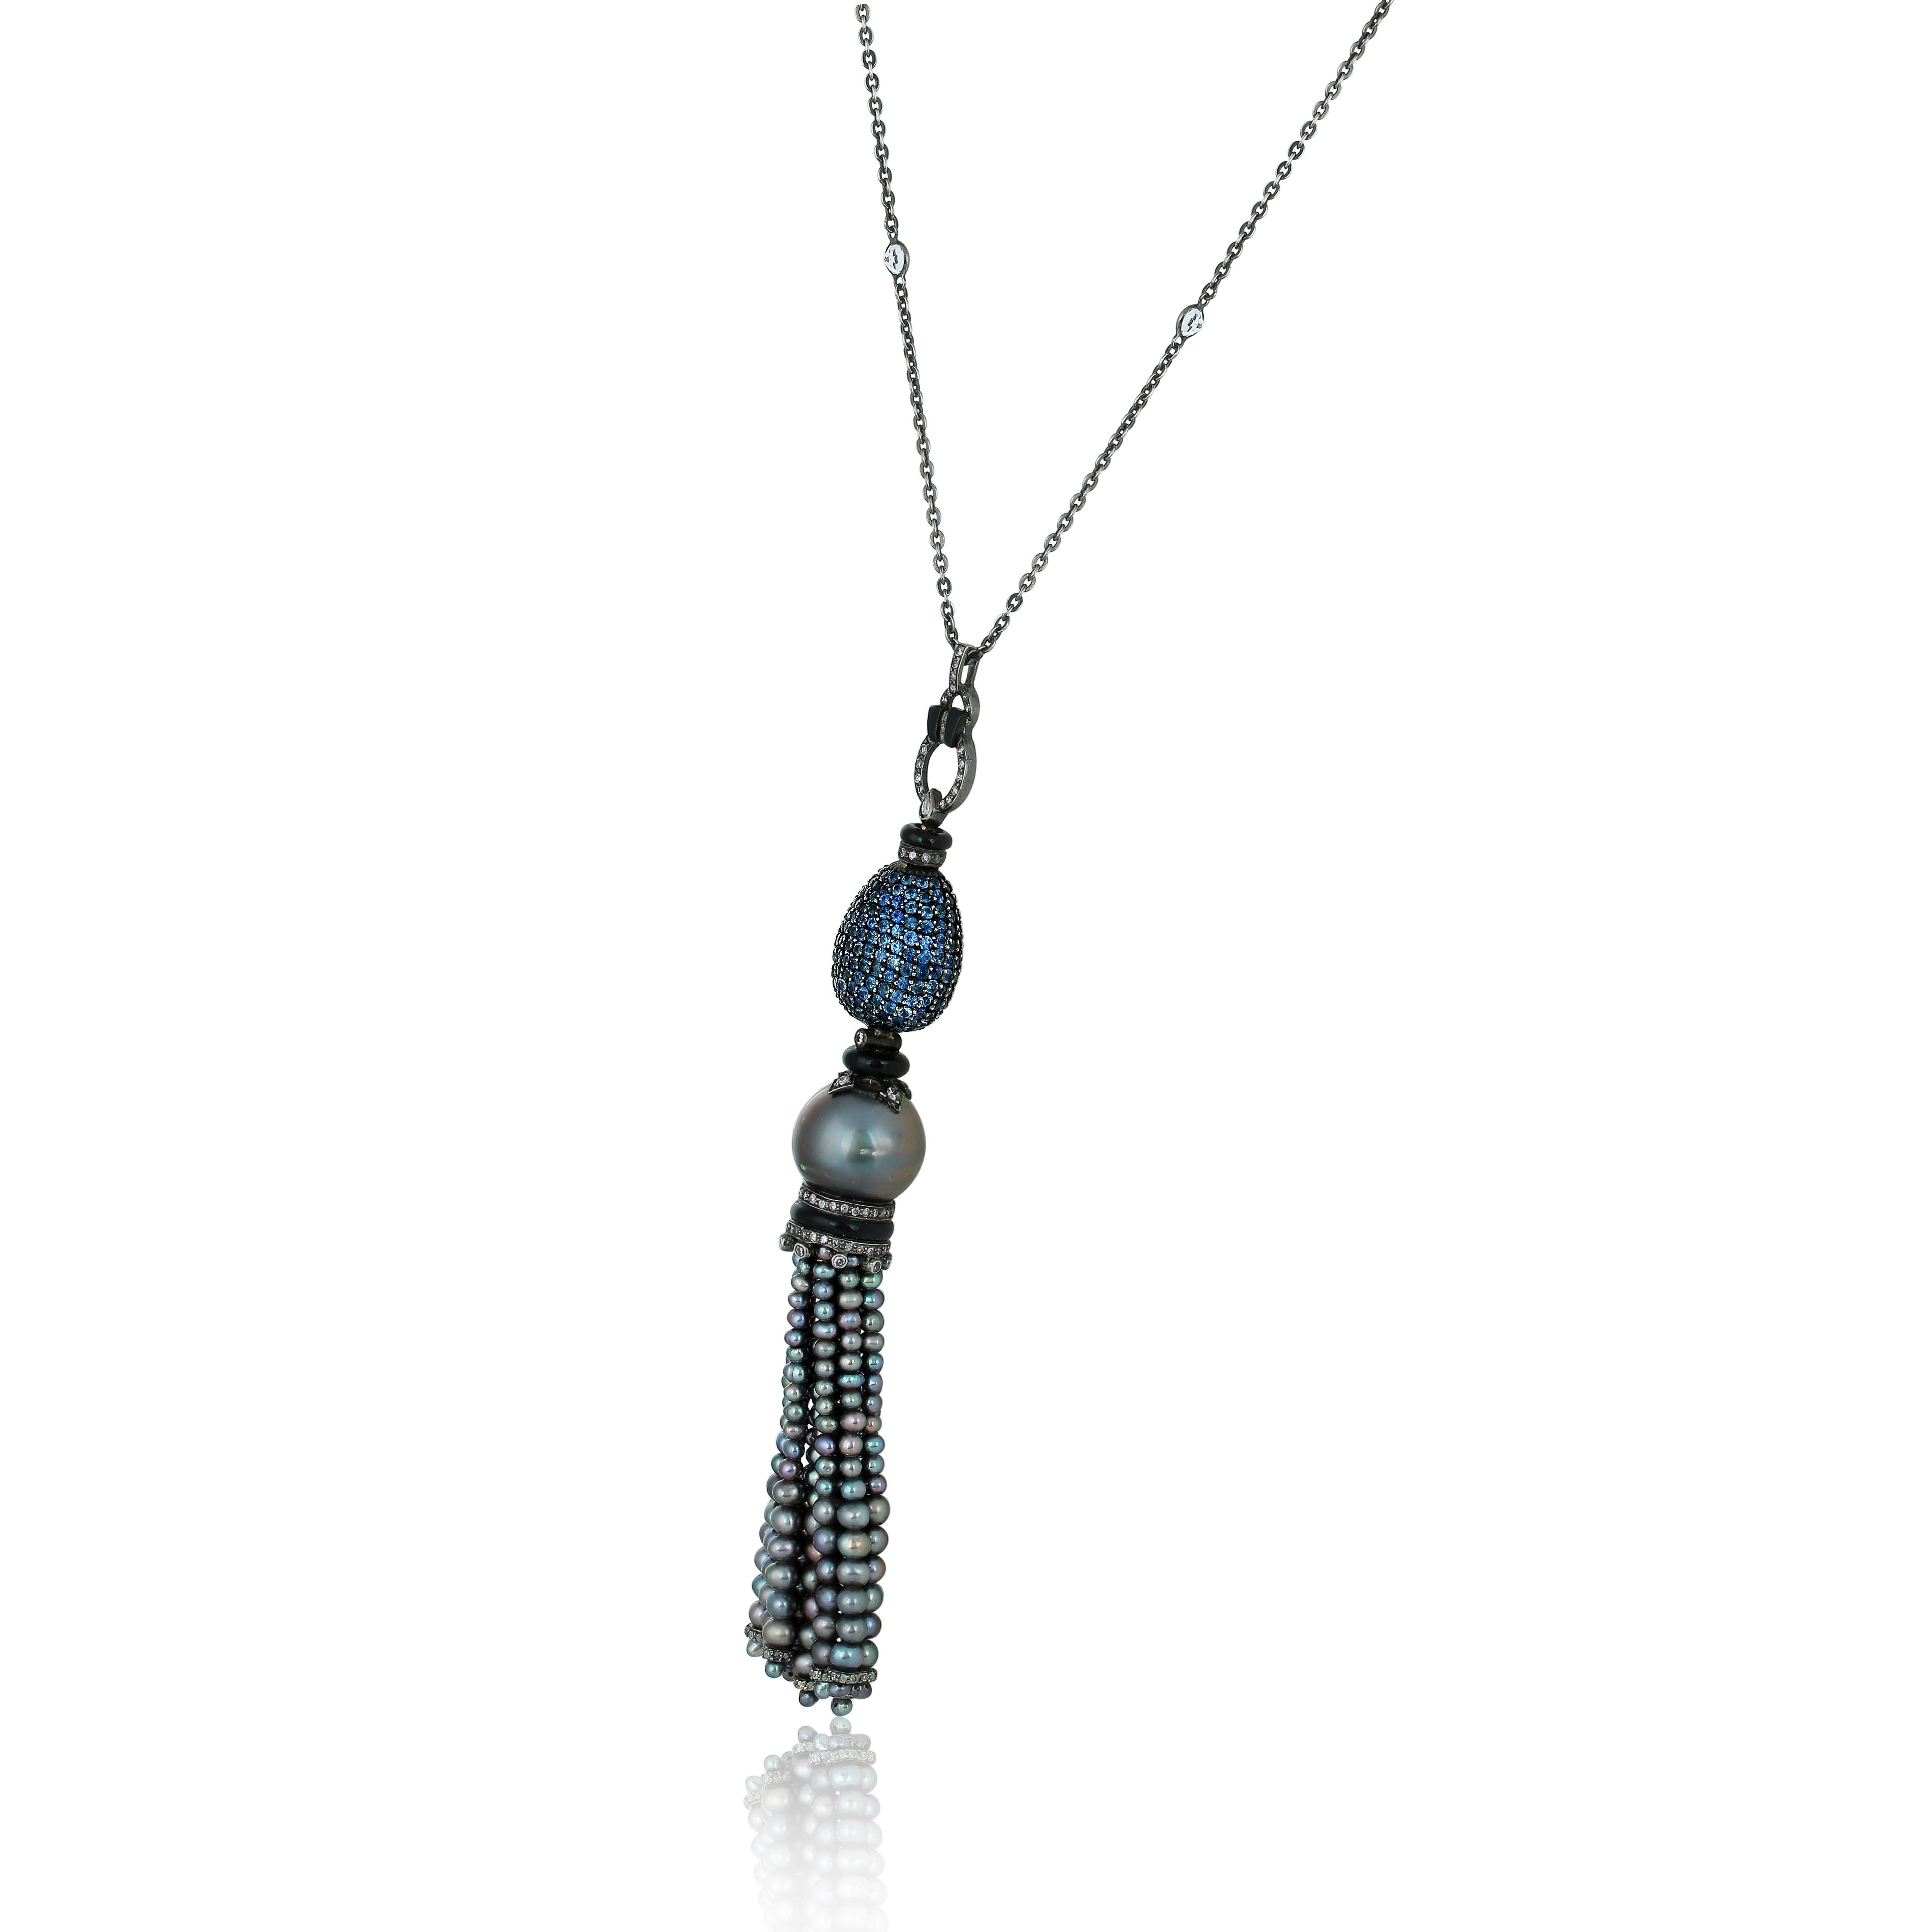 Introducing our 16Ct.T.W. Sapphire and Diamond Victorian Tassel Necklace with Pearls in 18k/925 - a piece that is sure to add a touch of luxury and elegance to any outfit. The tassel features a grey pearl  in between a sapphire lob at top and